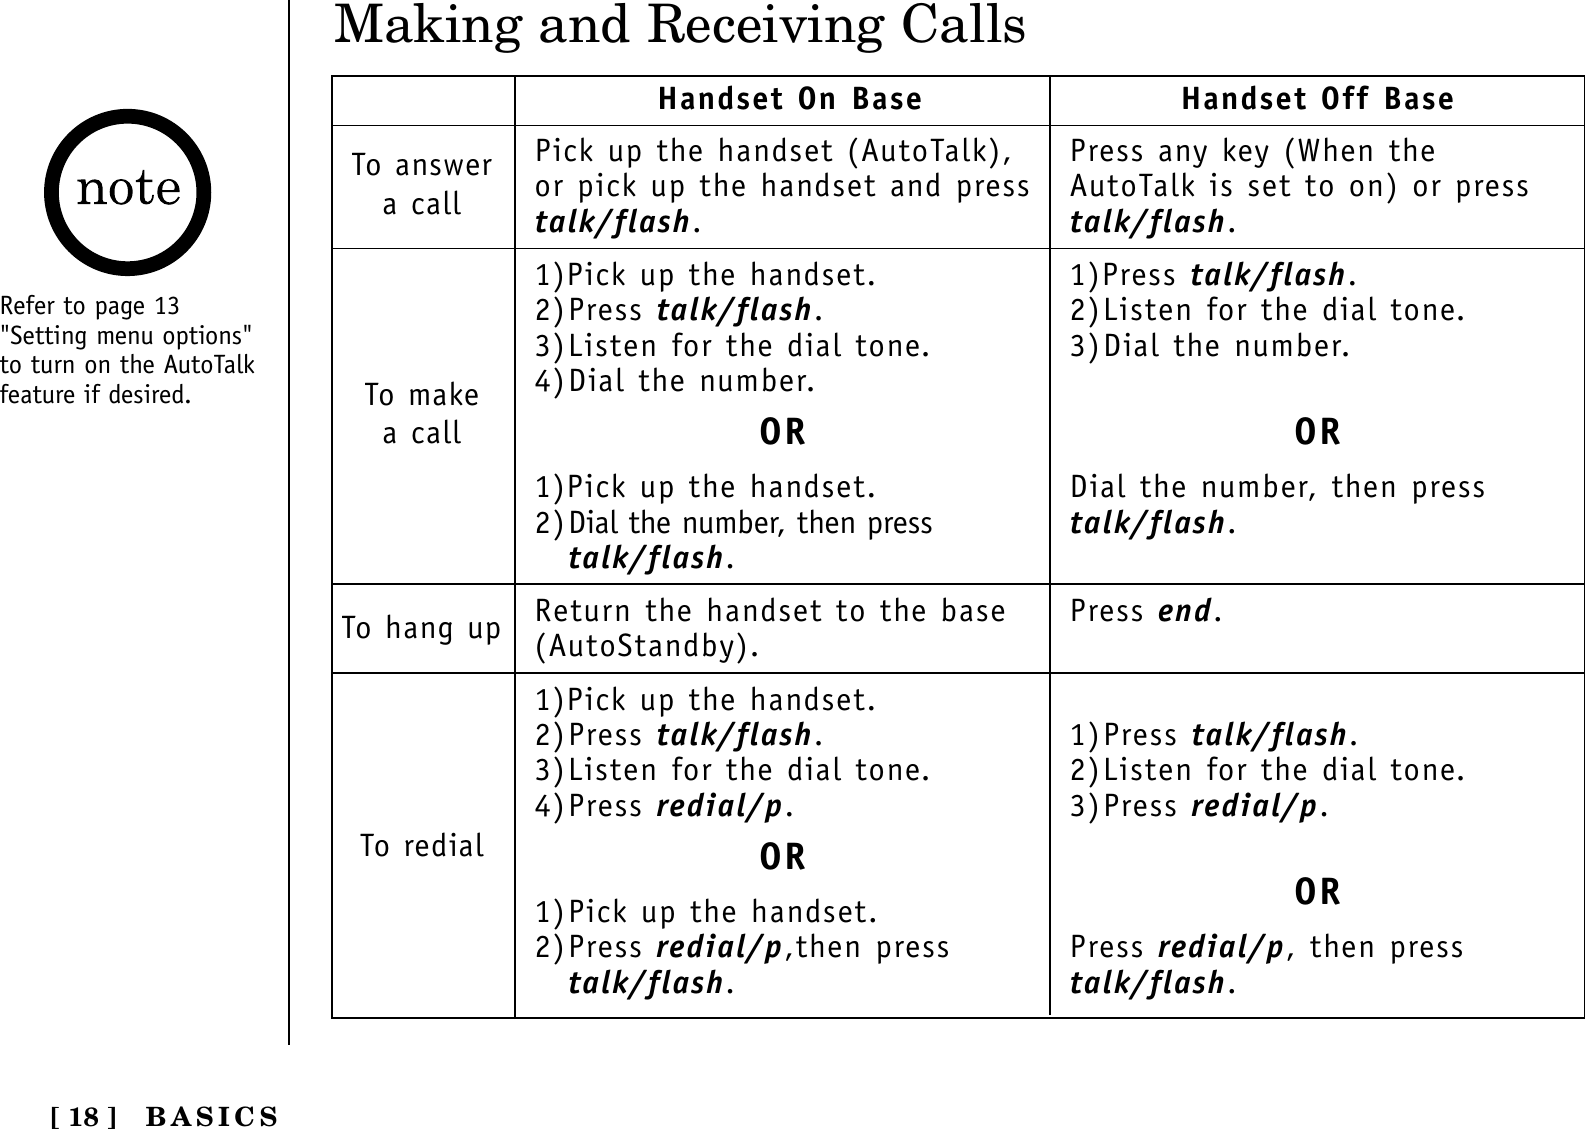 Making and Receiving CallsPick up the handset (AutoTalk),or pick up the handset and presstalk/flash.1)Pick up the handset.2)Press talk/flash.3)Listen for the dial tone.4)Dial the number.OR1)Pick up the handset.2)Dial the number, then presstalk/flash.Return the handset to the base(AutoStandby).1)Pick up the handset.2)Press talk/flash.3)Listen for the dial tone.4)Press redial/p.OR1)Pick up the handset.2)Press redial/p,then presstalk/flash.Press any key (When theAutoTalk is set to on) or presstalk/flash.1)Press talk/flash.2)Listen for the dial tone.3)Dial the number.ORDial the number, then presstalk/flash.Press end.1)Press talk/flash.2)Listen for the dial tone.3)Press redial/p.ORPress redial/p, then presstalk/flash.Handset On Base Handset Off BaseTo answera callTo makea callTo hang upTo redialRefer to page 13&quot;Setting menu options&quot;to turn on the AutoTalkfeature if desired. [ 18 ] BASICS